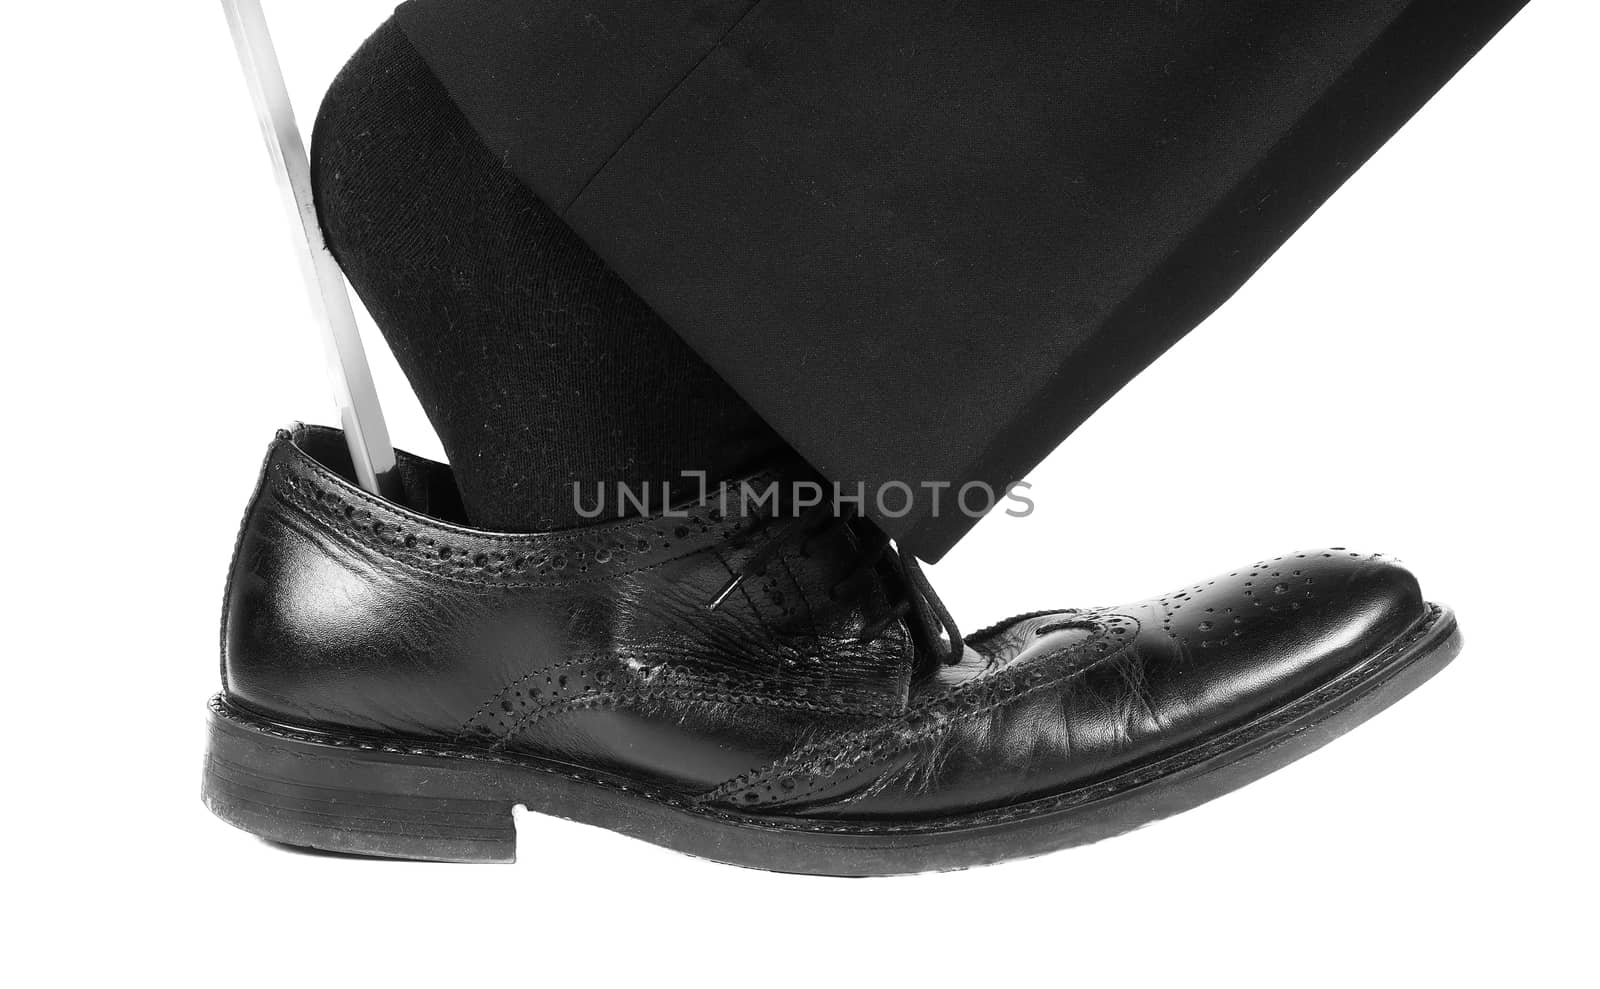 Foot with black sock into black leather shoe by Arvebettum